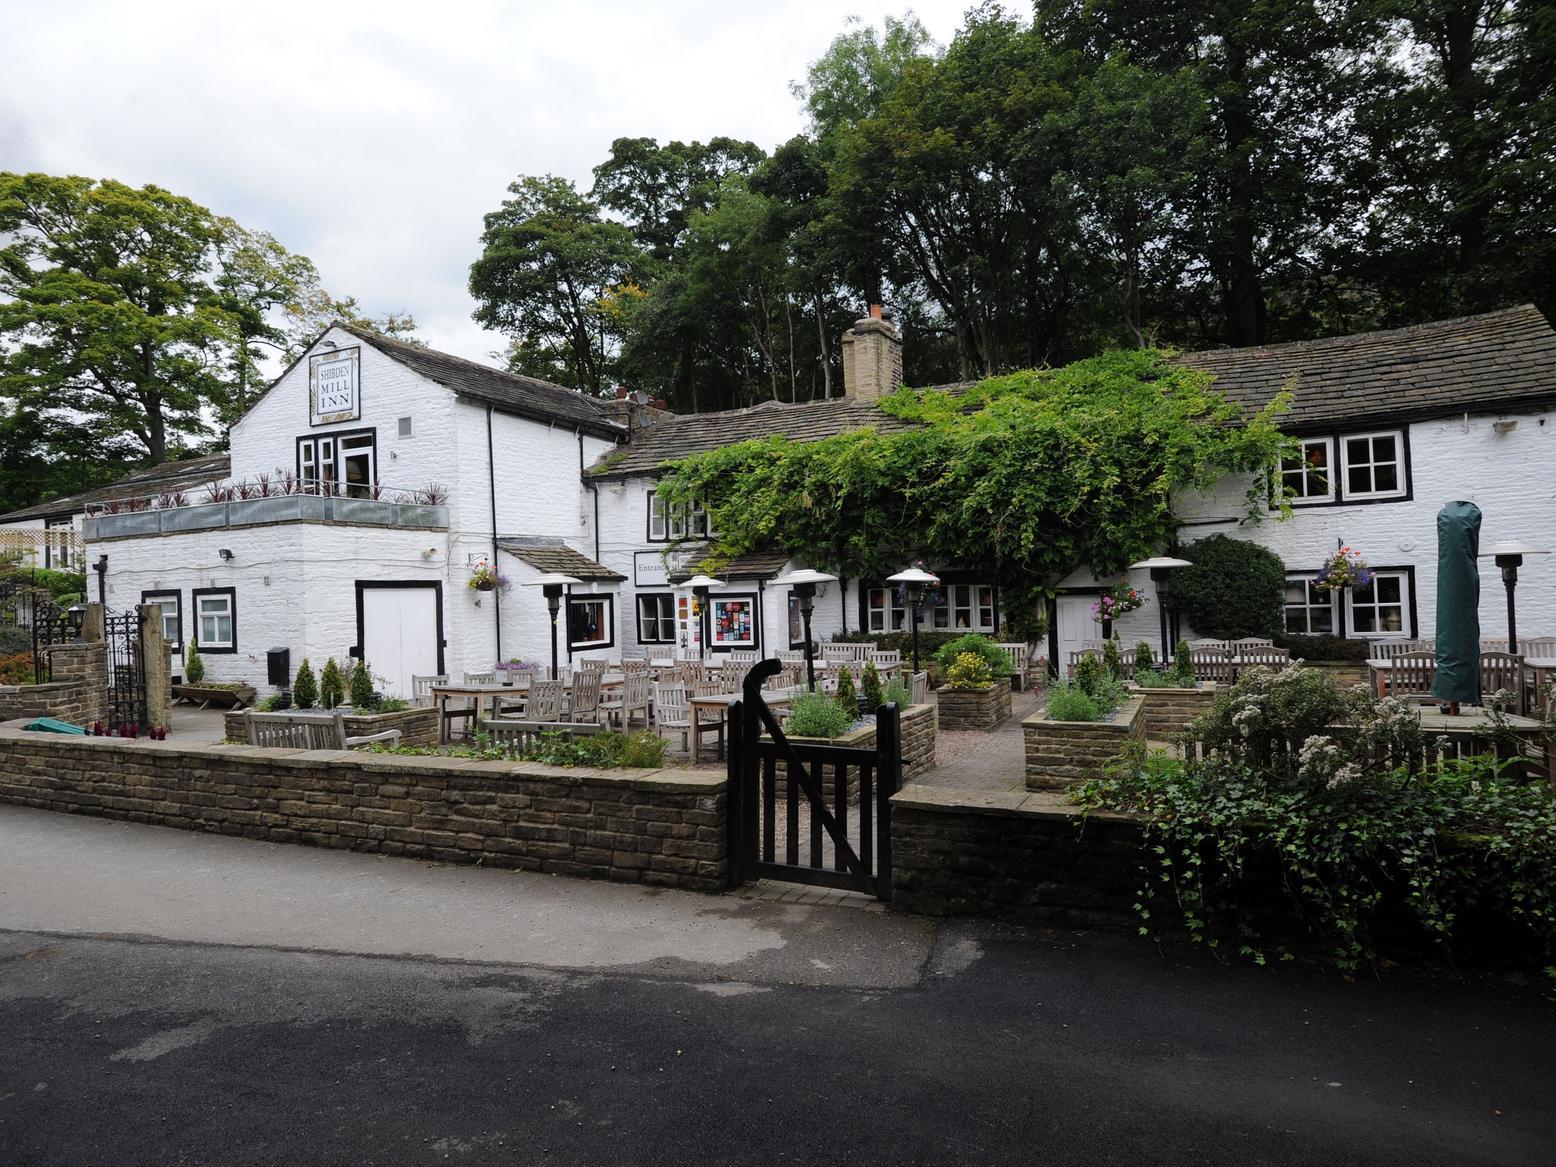 This cosy eatery in the Shibden Valley offers fresh seasonal dishes with a number of menus to choose from including sunday lunch, tasting menu and afternoon tea.